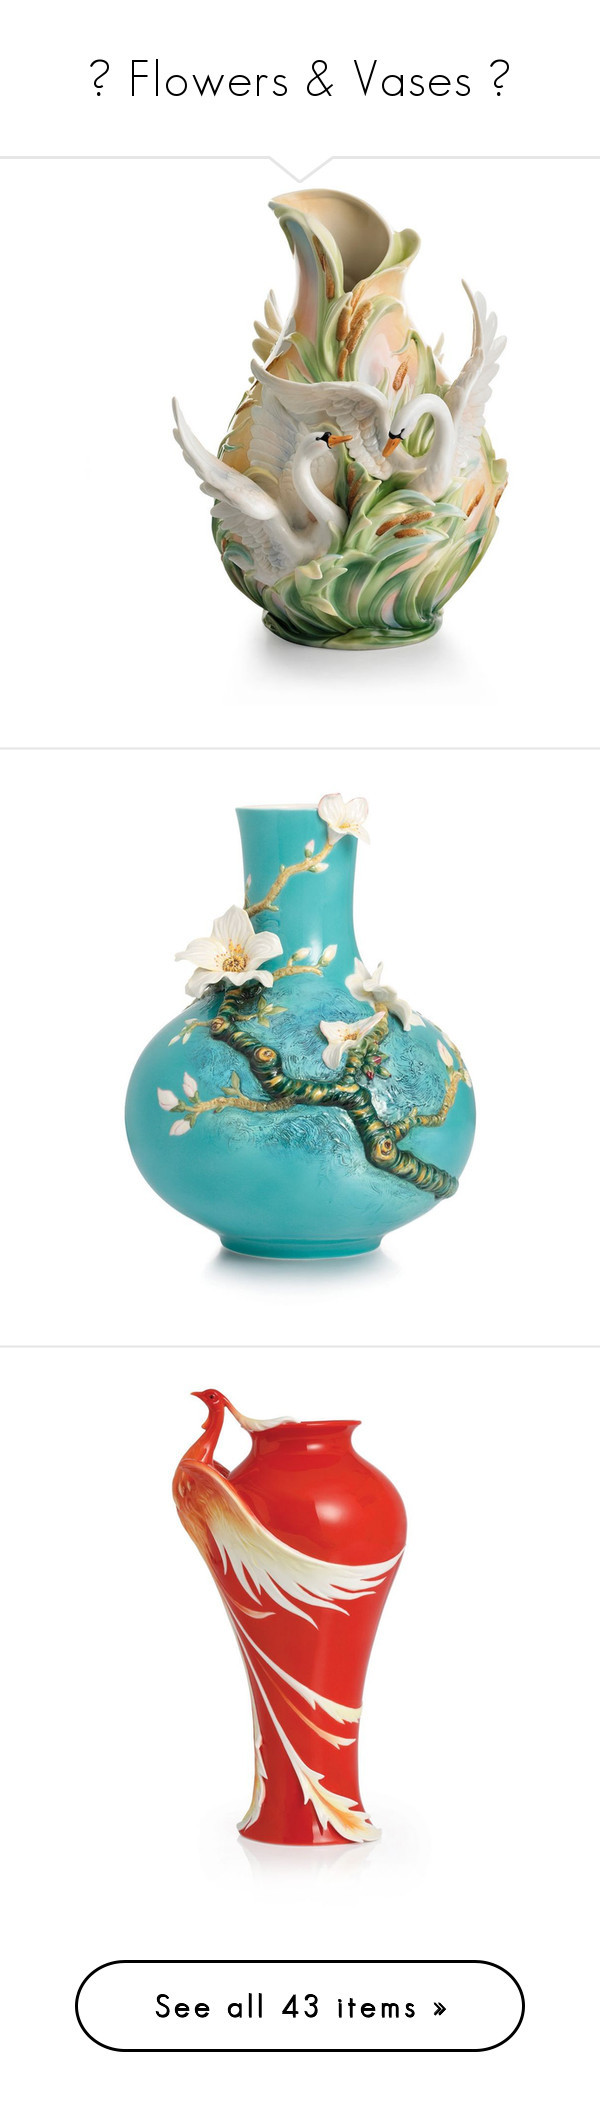 14 Wonderful Lsa International Vases Poland 2024 free download lsa international vases poland of dc29fc28c flowers vases dc29fc28cc2bc by reinawol ac29dc2a4 liked on polyvore featuring with regard to flowers vases dc29fc28cc2bc by reinawol a